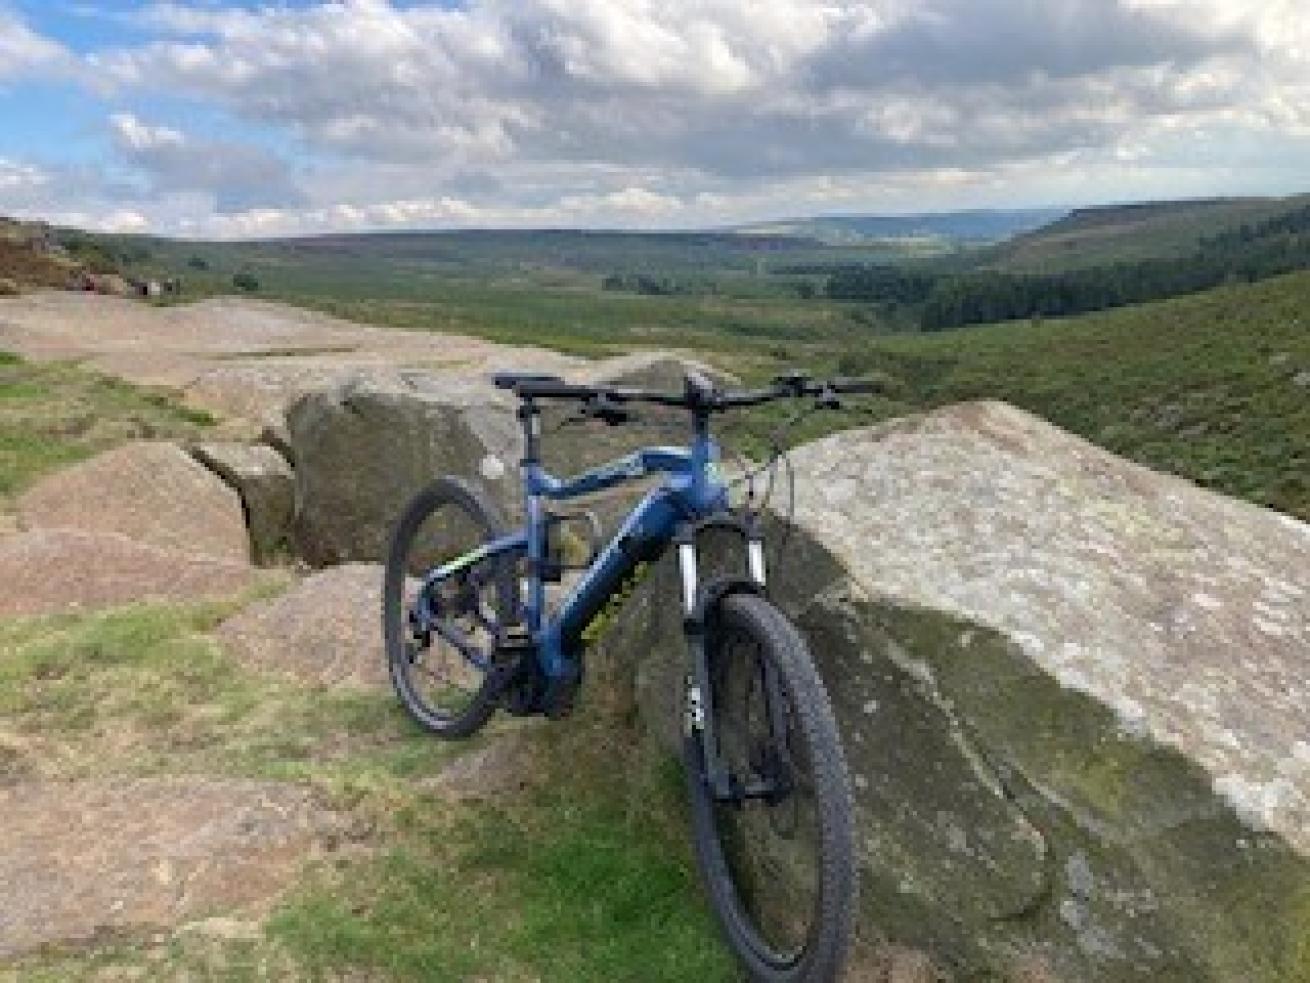 An e-bike propped up against a stone wall in the middle of fields with hills in the background